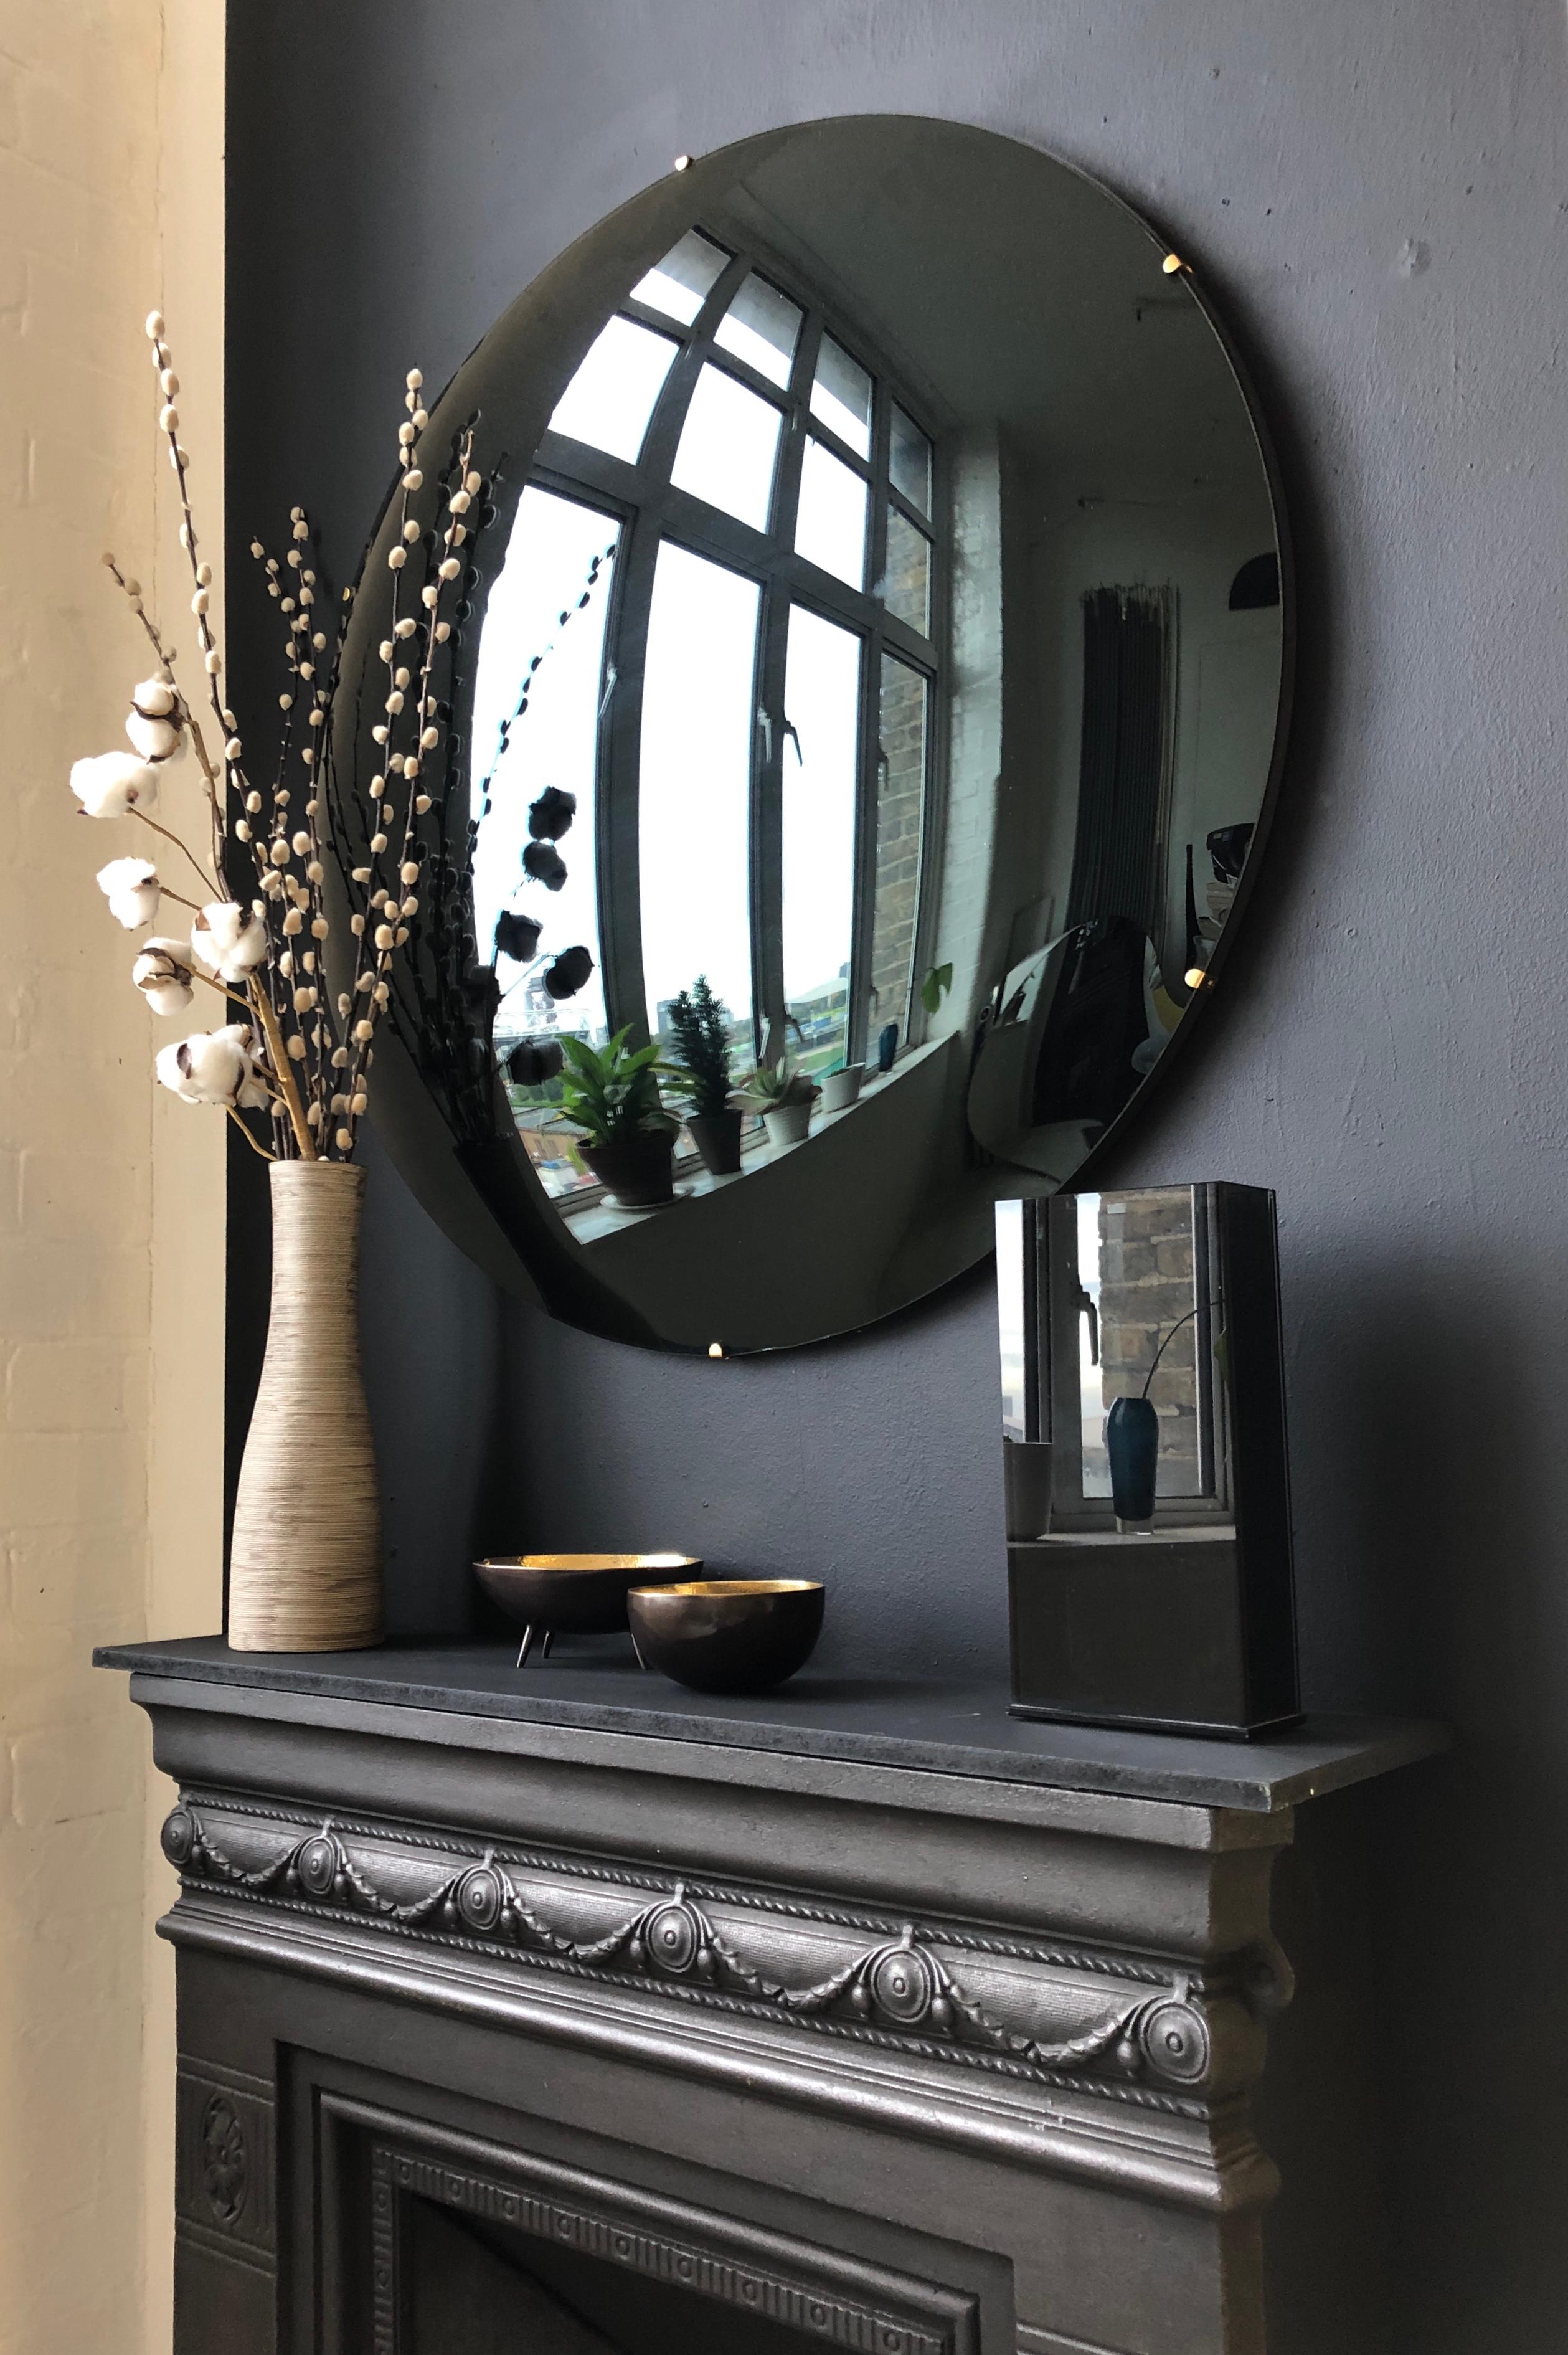 Stunning frameless black convex mirror for a unique statement above a fireplace, a console table or anywhere in a home, hospitality or commercial space.

Each Orbis™ convex mirror is designed and handcrafted in London, UK. Slight variations in